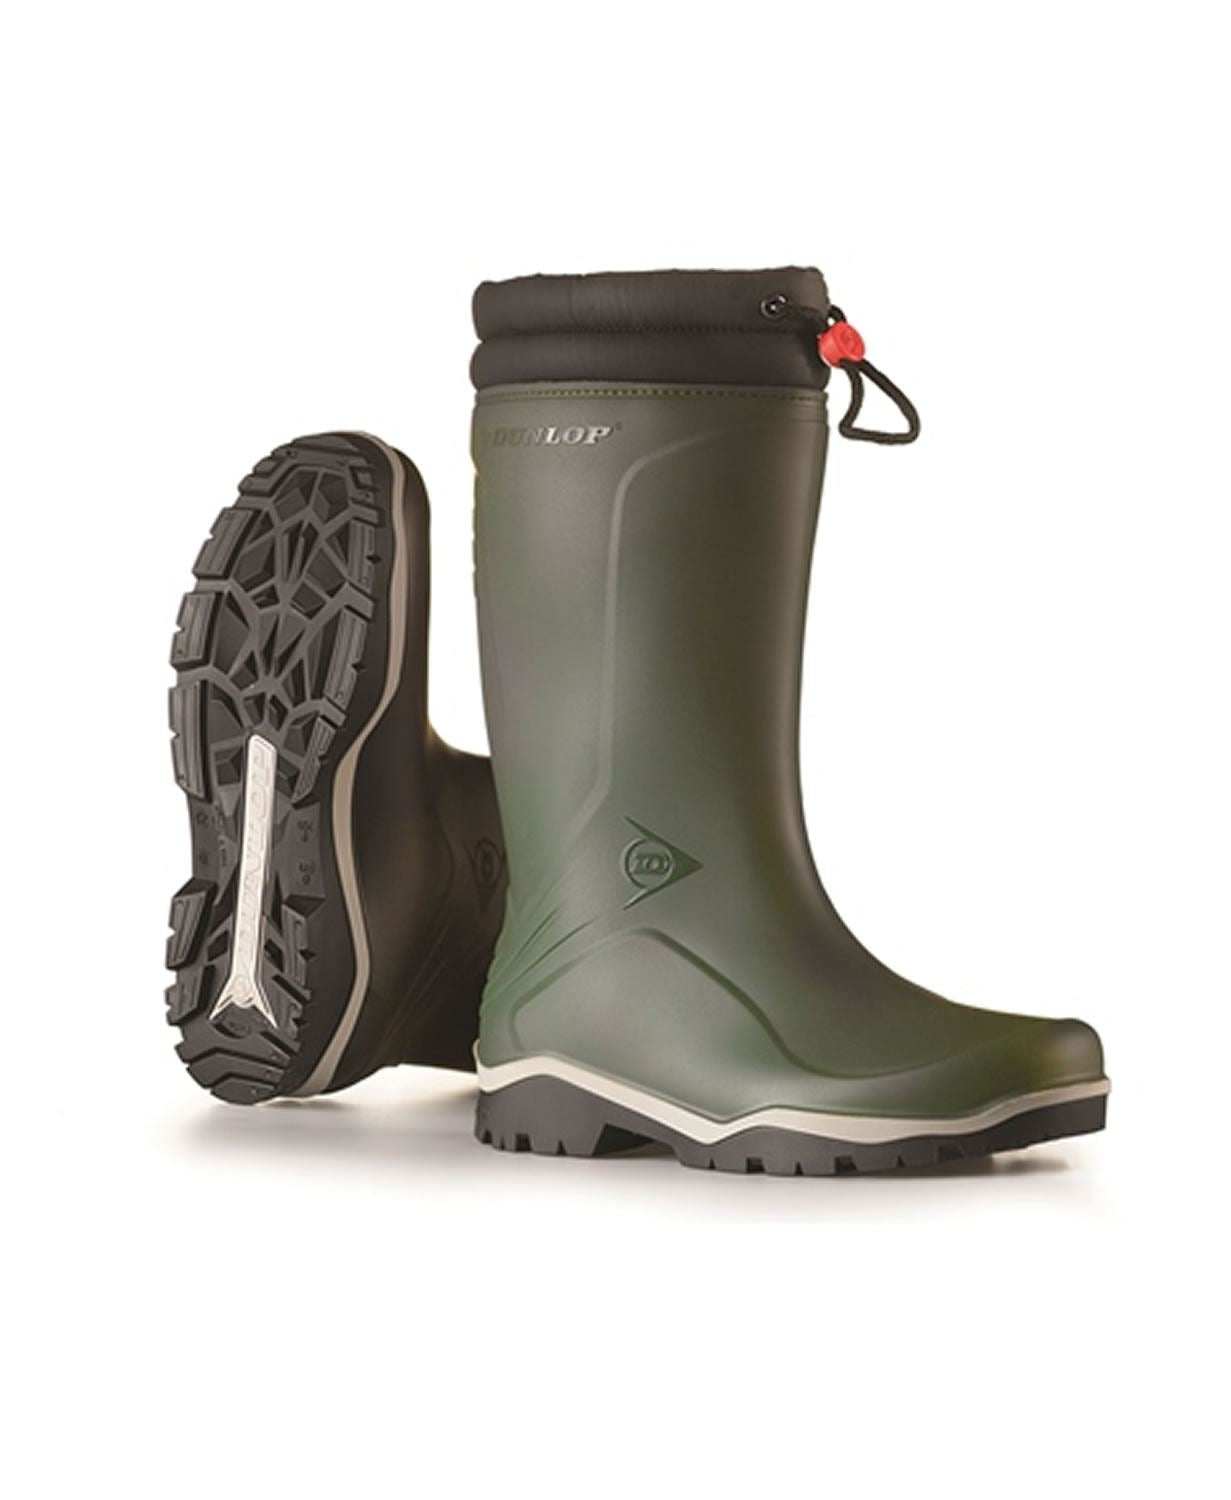 Dunlop Blizzard Boots - Just Horse Riders